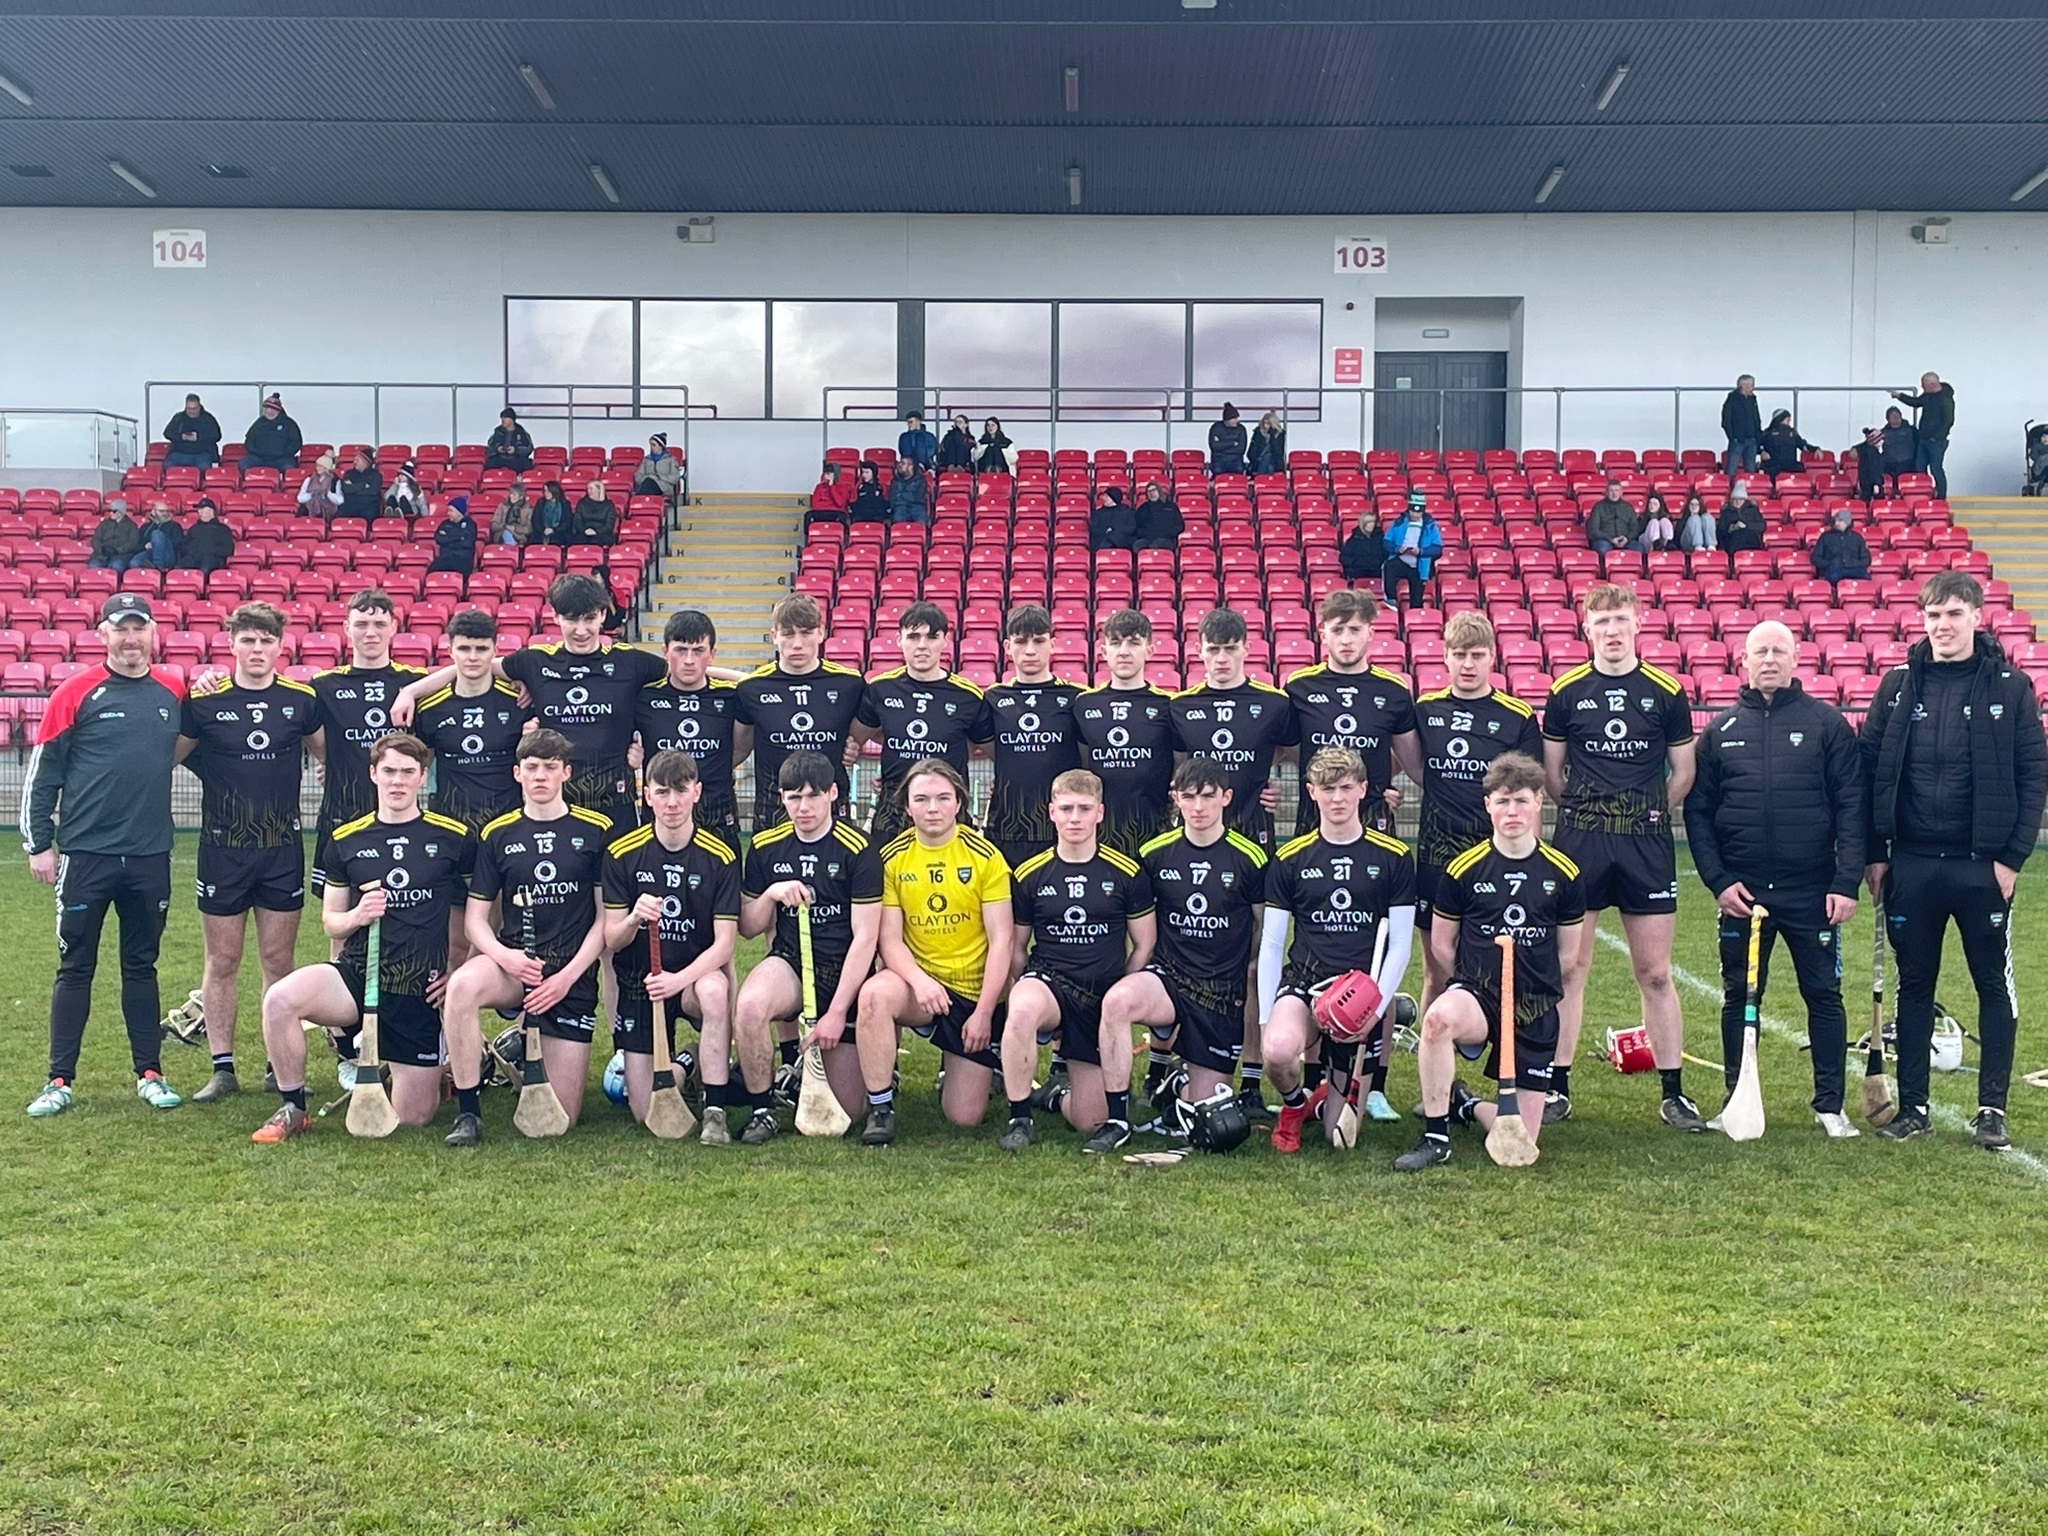 U20 Hurlers go down to hot favourites Derry in All Ireland opener